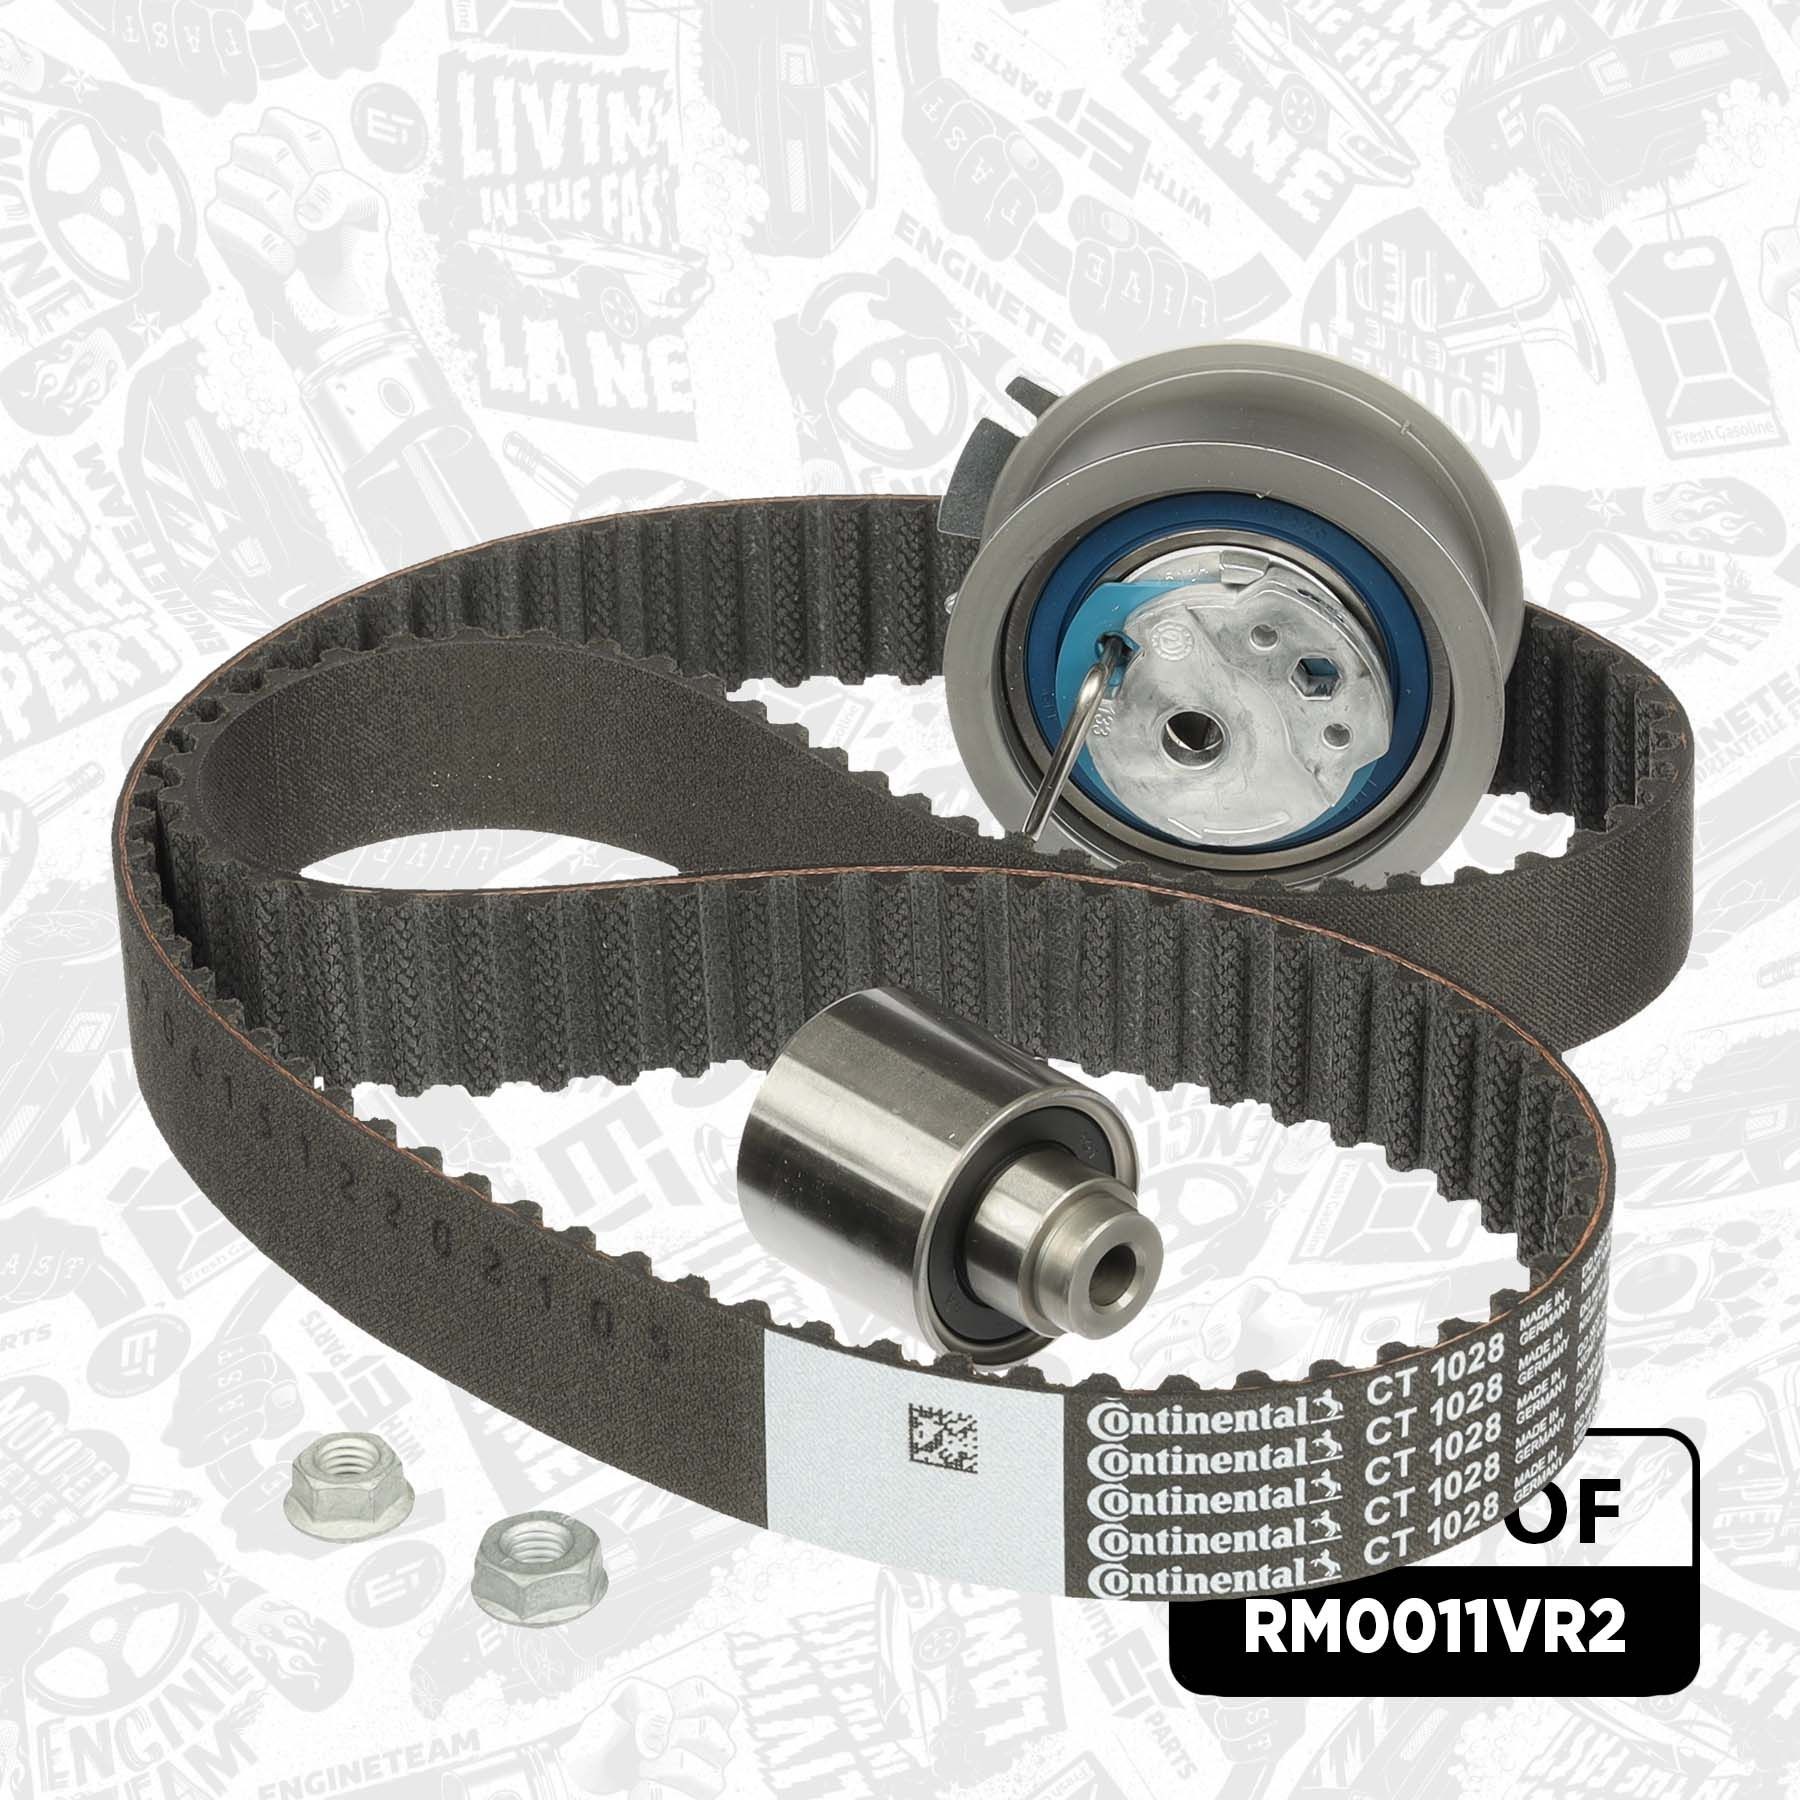 RM0011VR2 Water pump and timing belt ET ENGINETEAM RM0011VR2 review and test